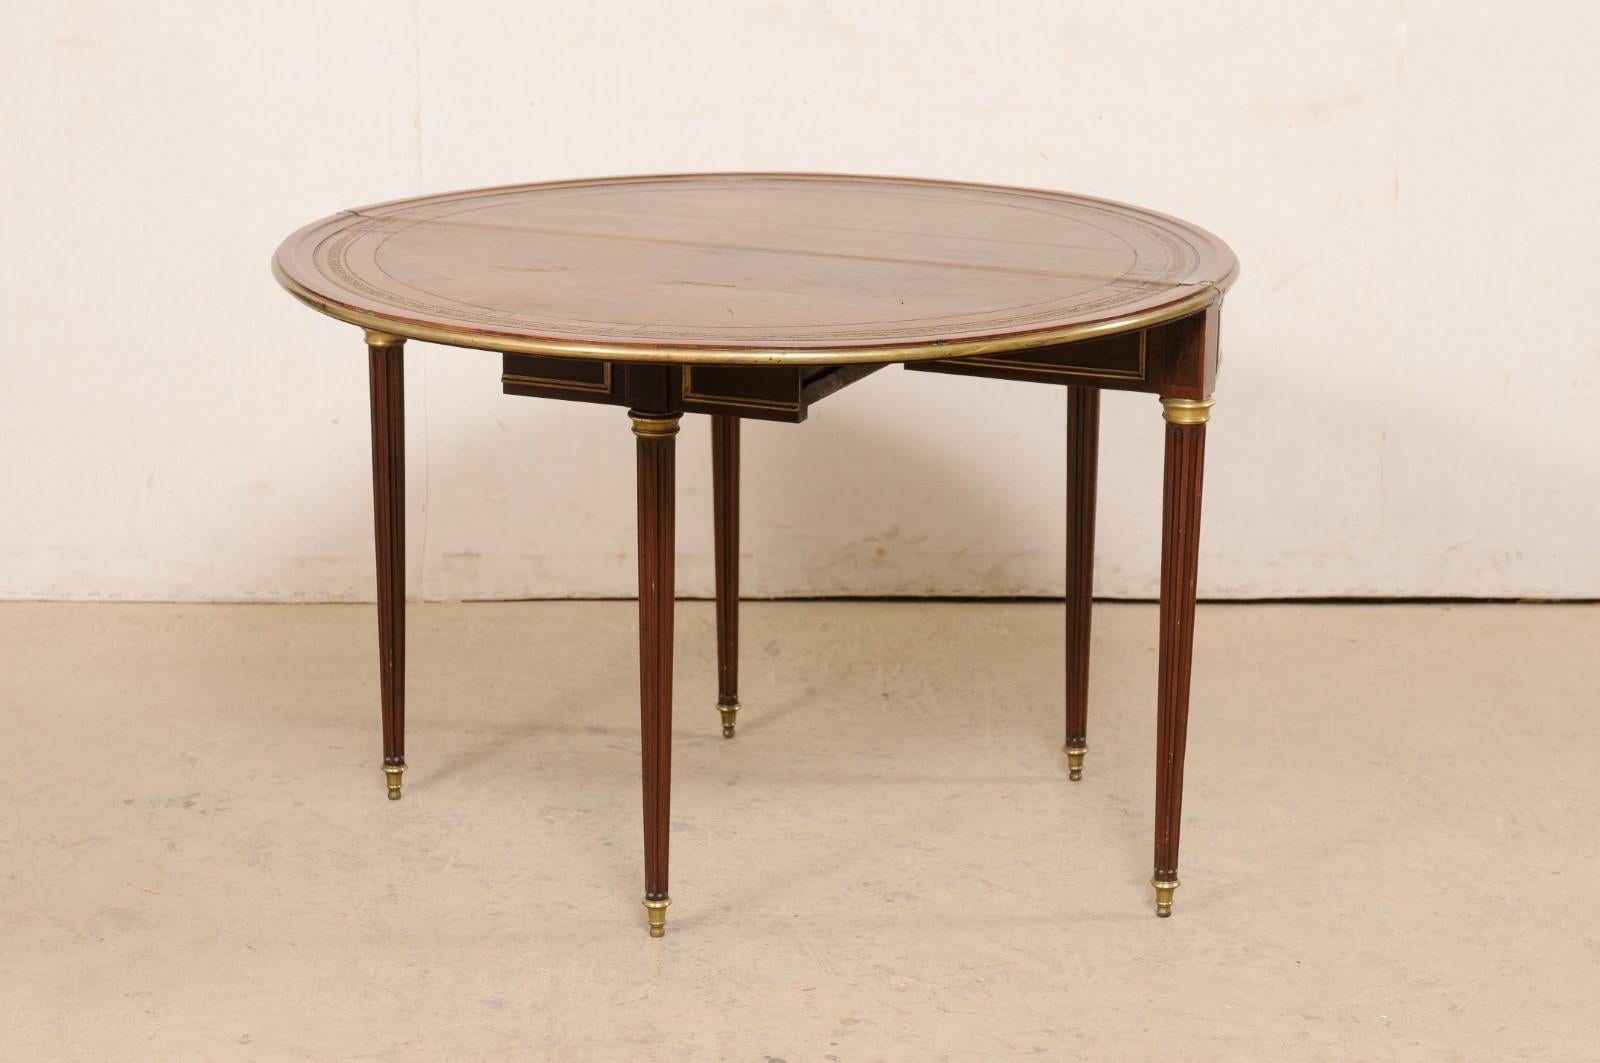  Elegant French Neoclassical Demi-to-round Table W/ Brass Accents, 19th C.  7